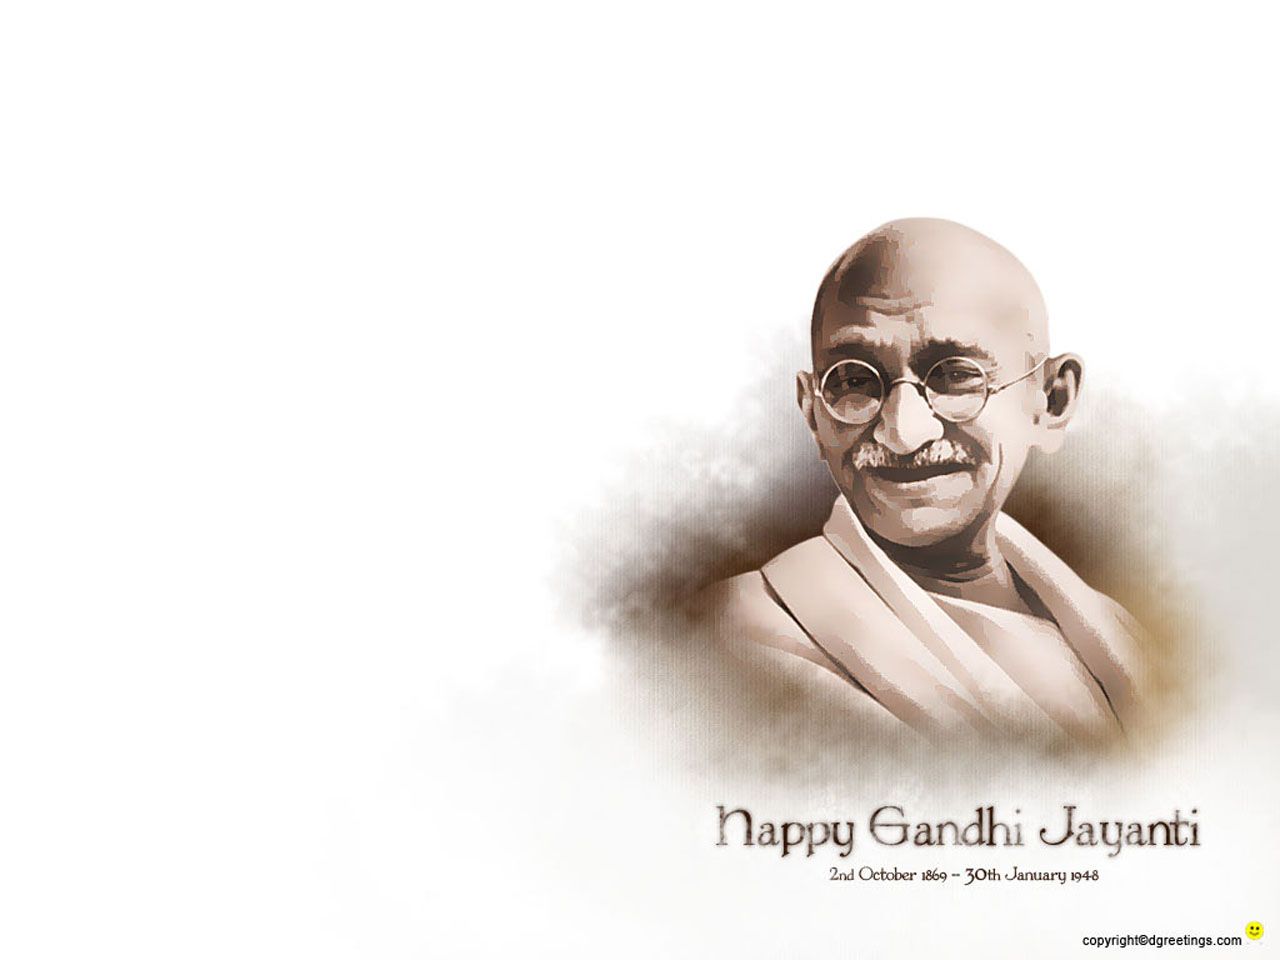 Happy Gandhi Jayanti 2022 Images Messages Whatsapp Status Facebook  Posts  Messages Photos Wishes Pics Wallpaper   Times of India